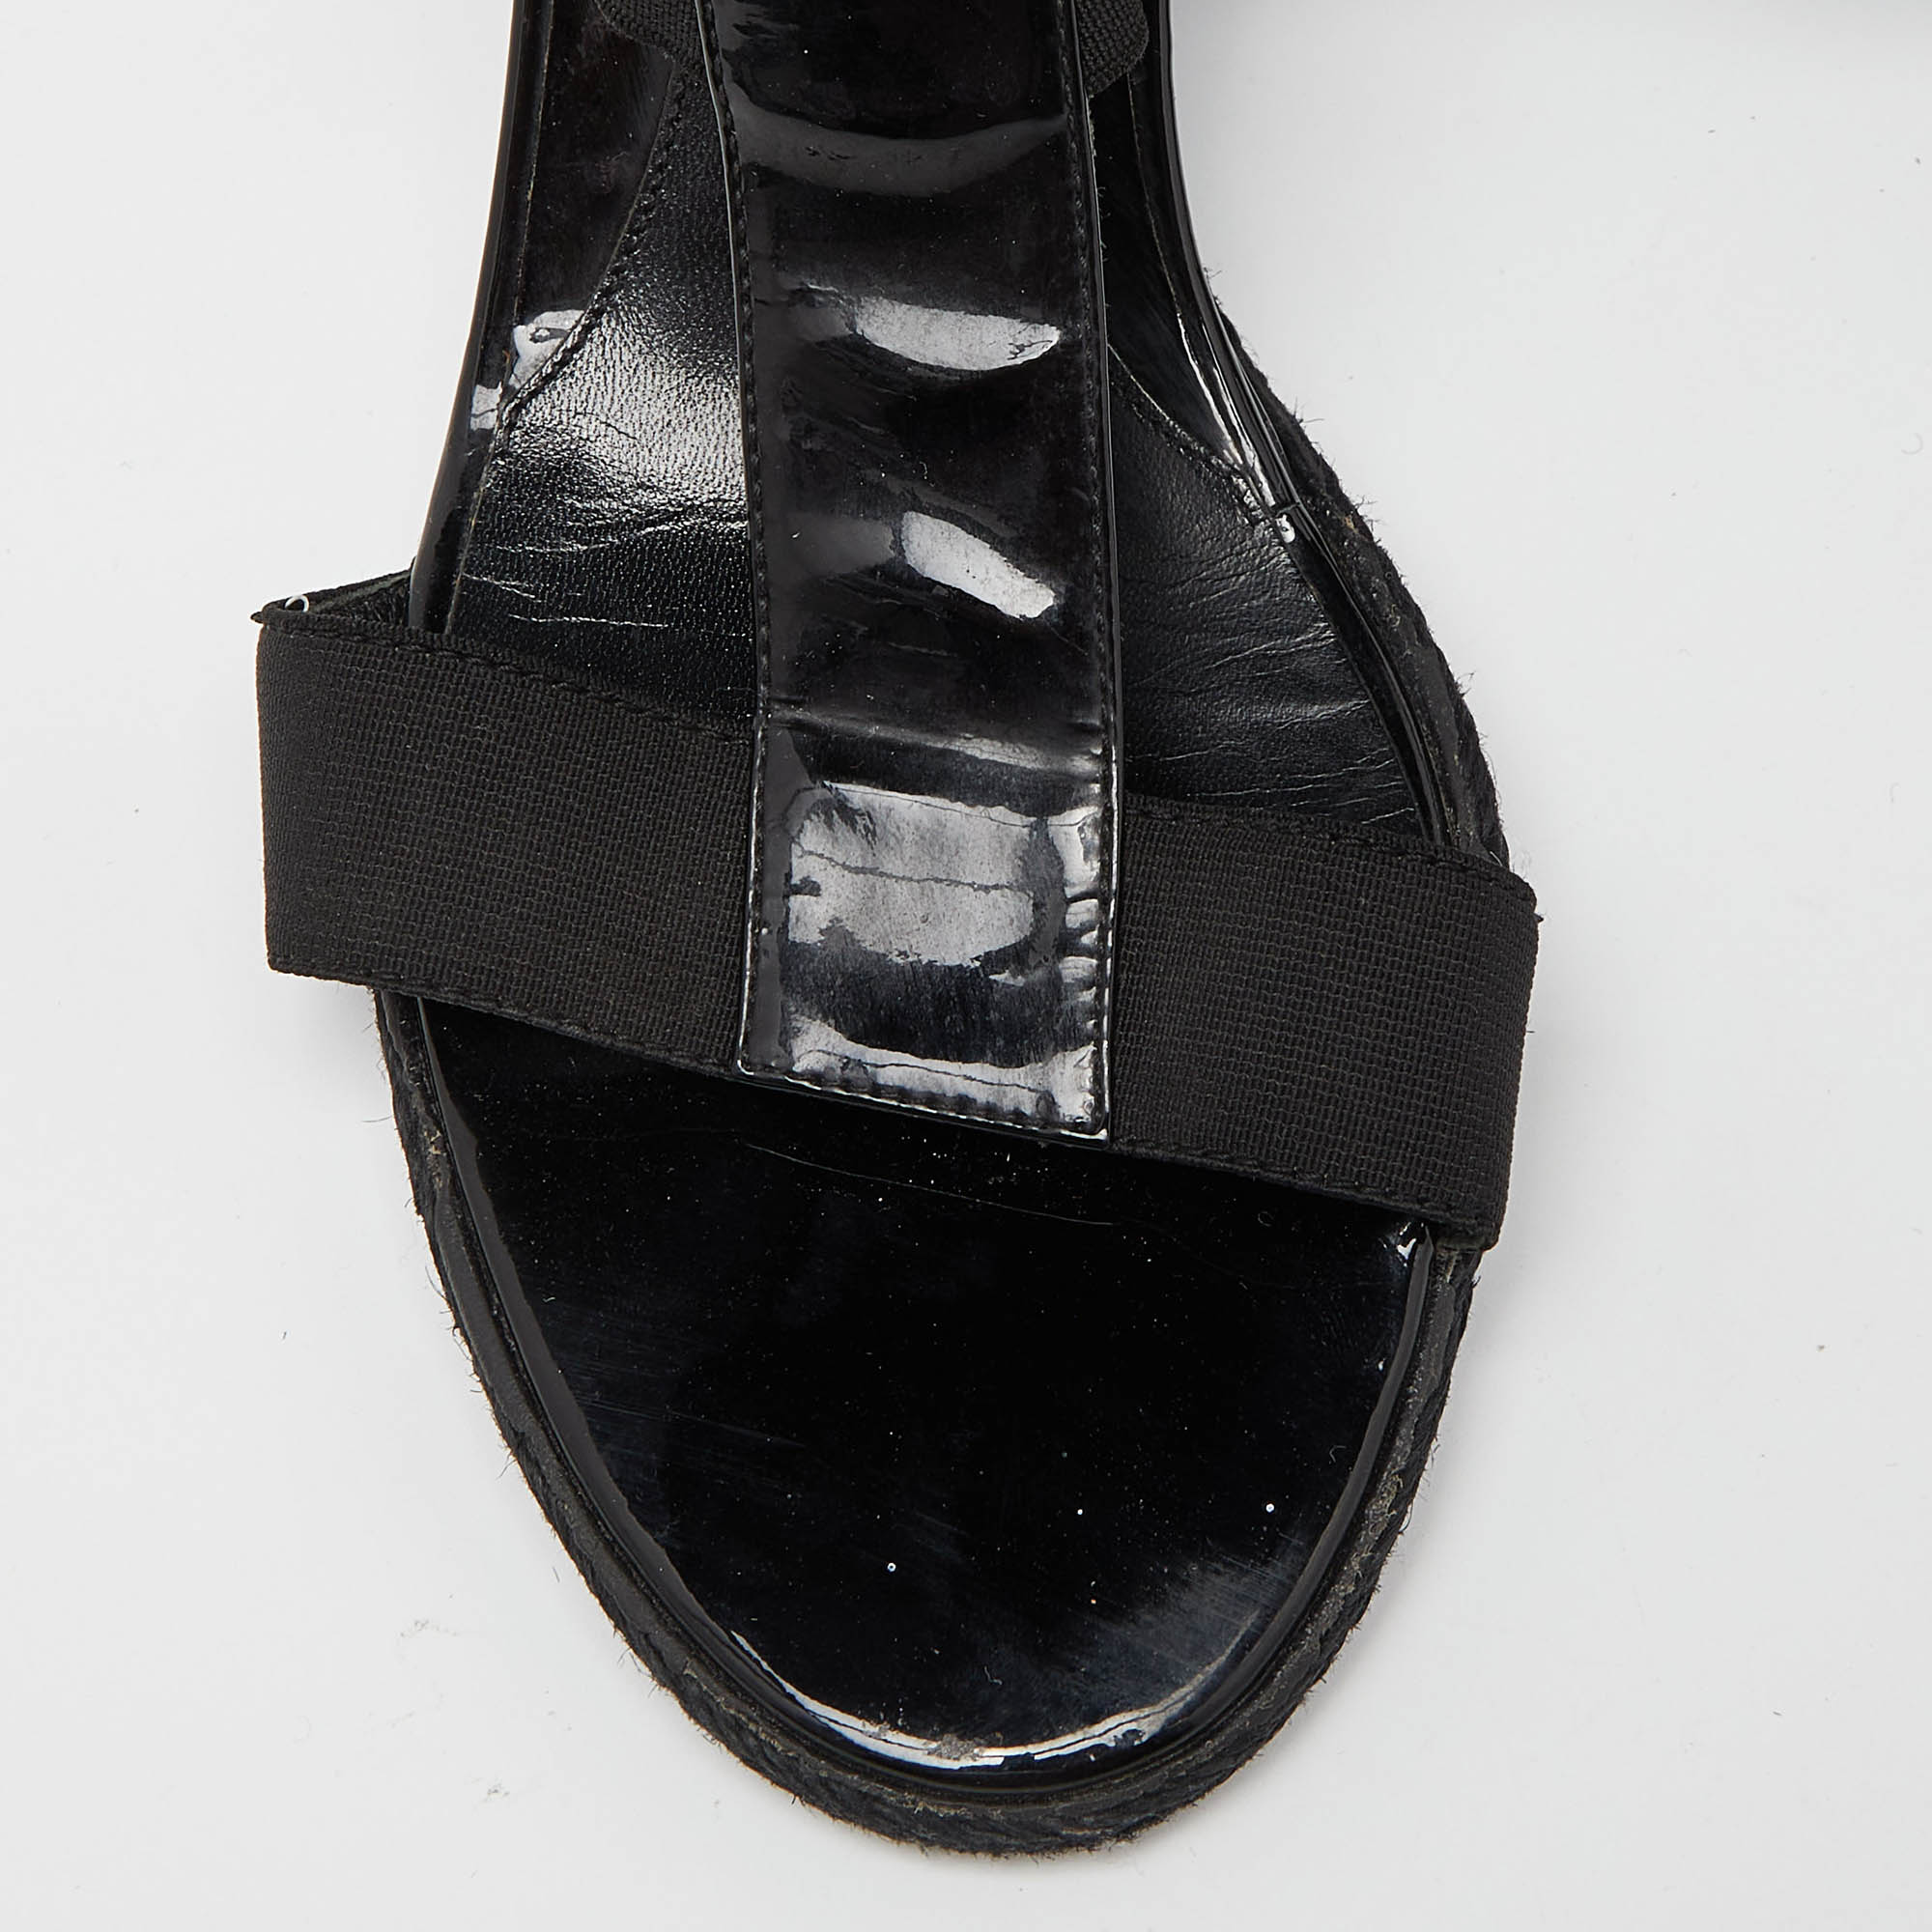 Fendi Black Patent Leather Ankle Strap Wedge Sandals Size 38